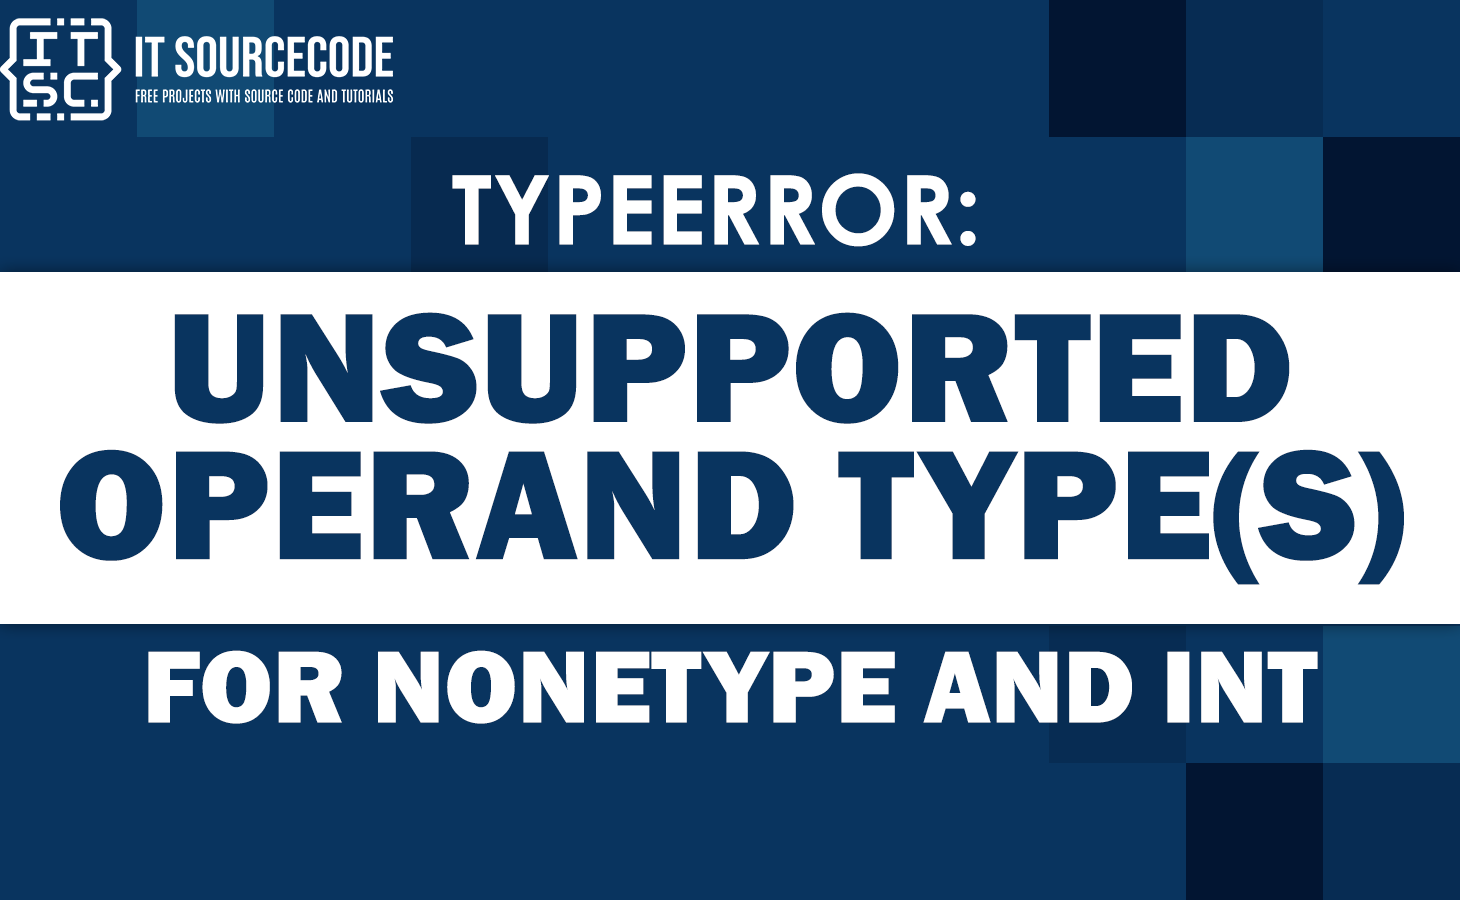 Typeerror unsupported operand type s for int and nonetype